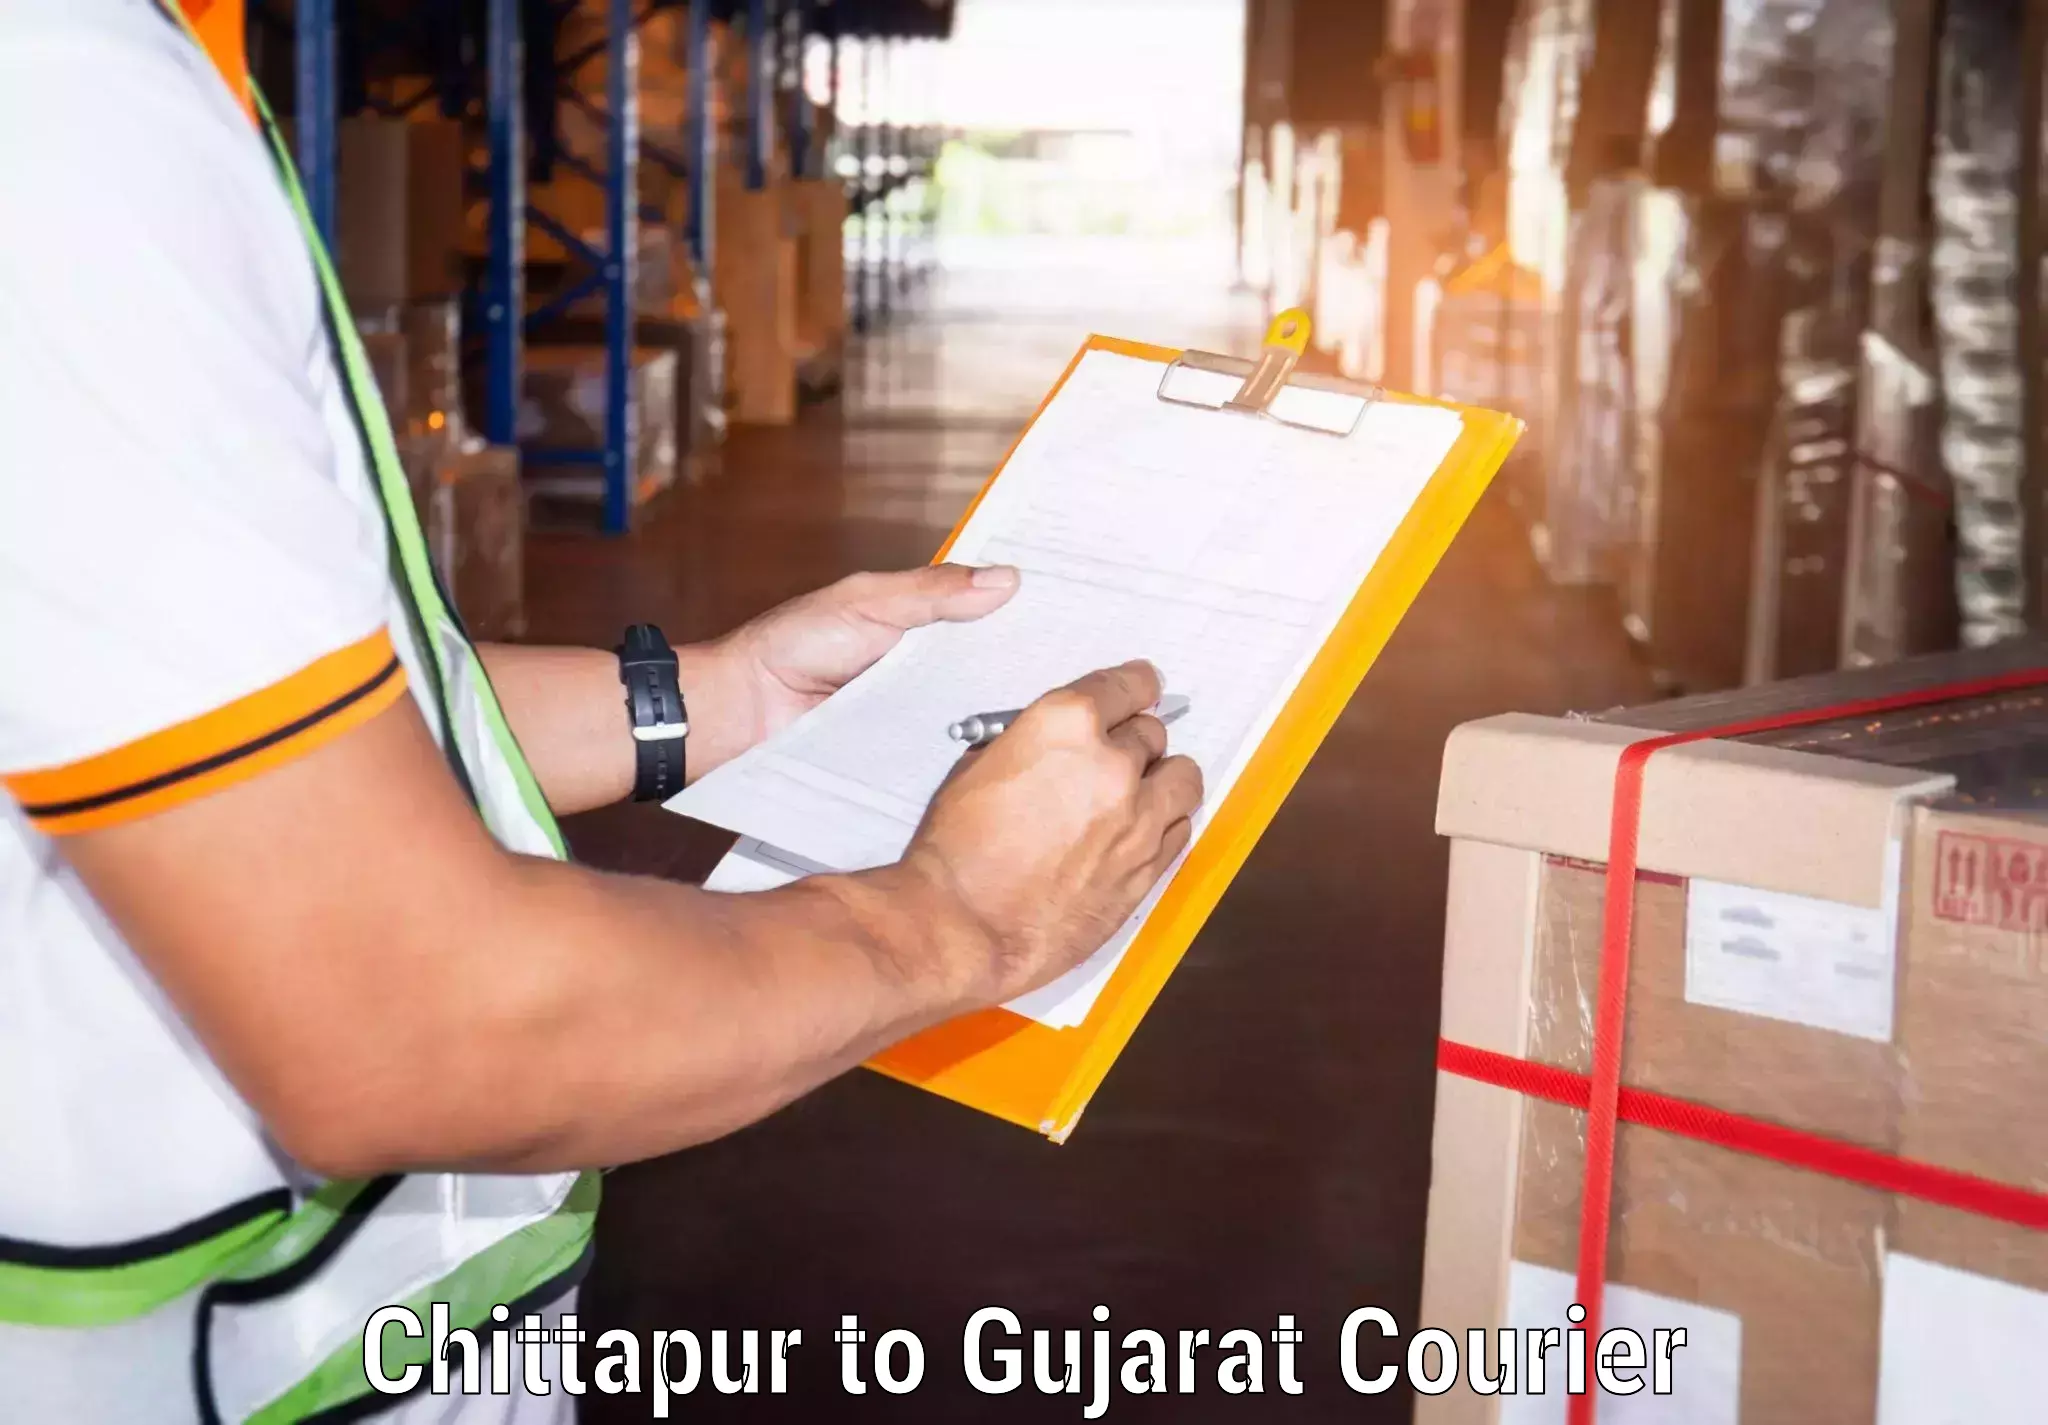 Global courier networks Chittapur to Mundra